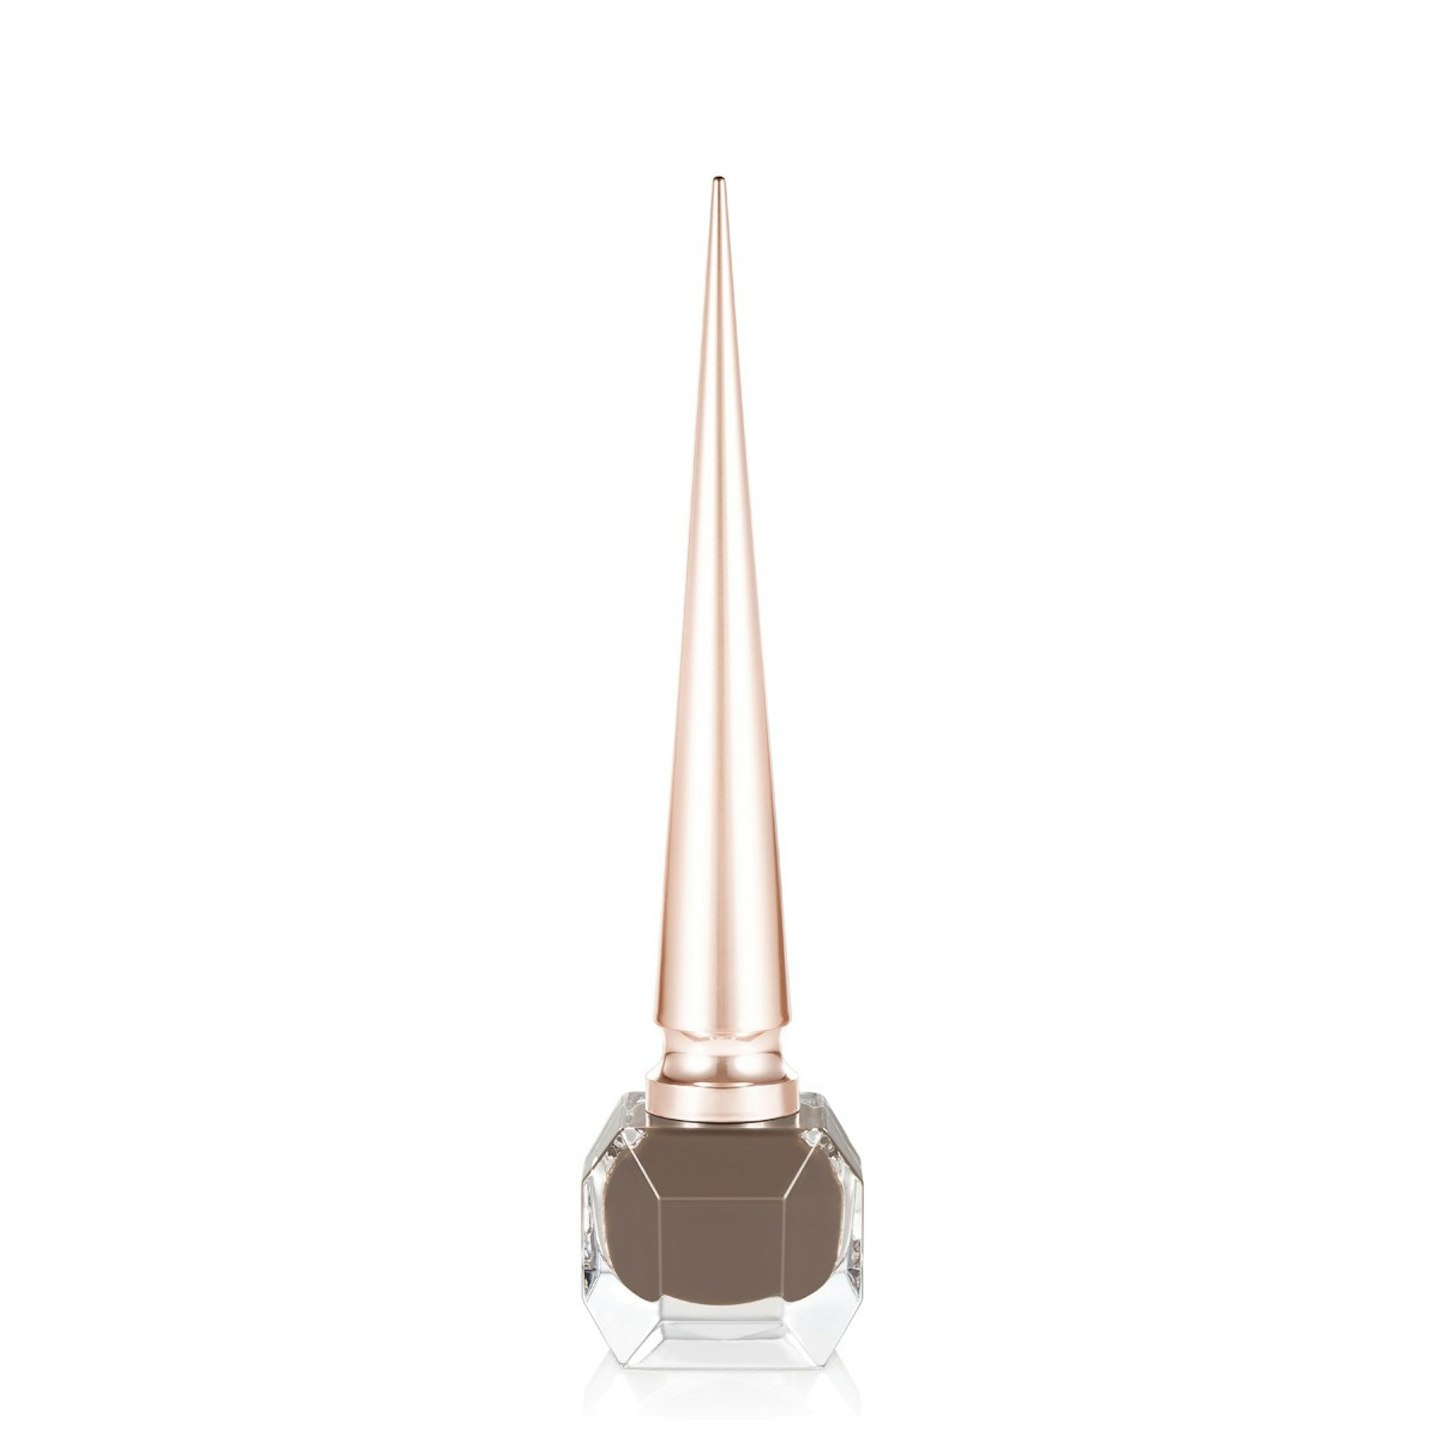 Best Nude Nail Varnishes 2022